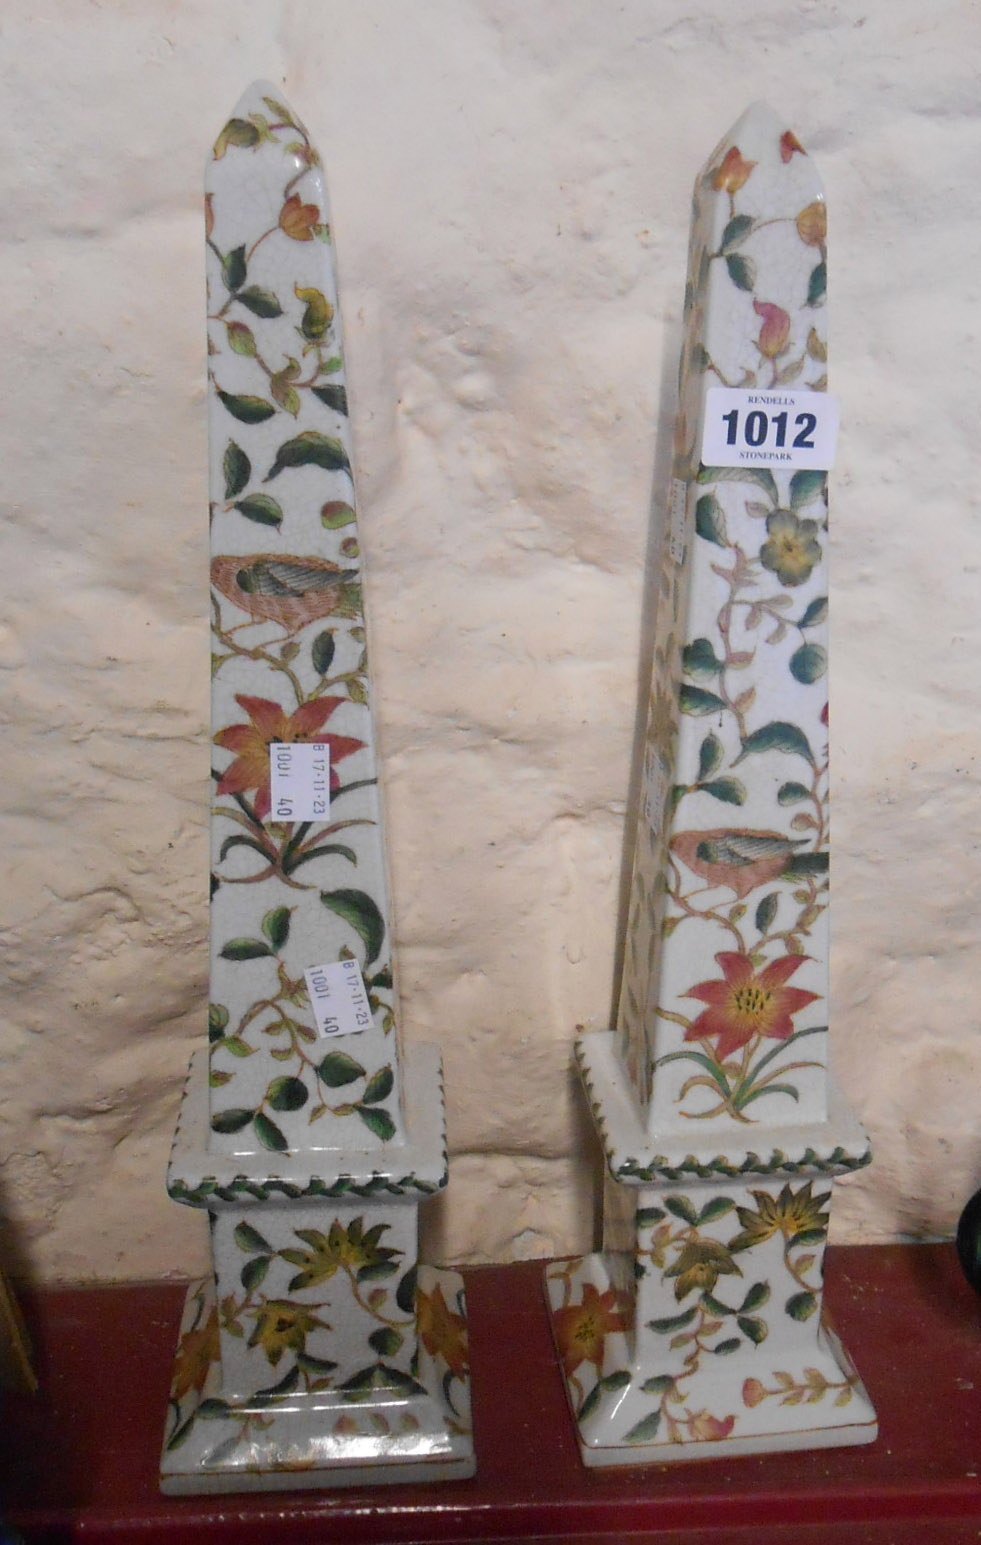 A pair of modern porcelain obelisks decorated with birds amidst foliage on a crackle glazed finish